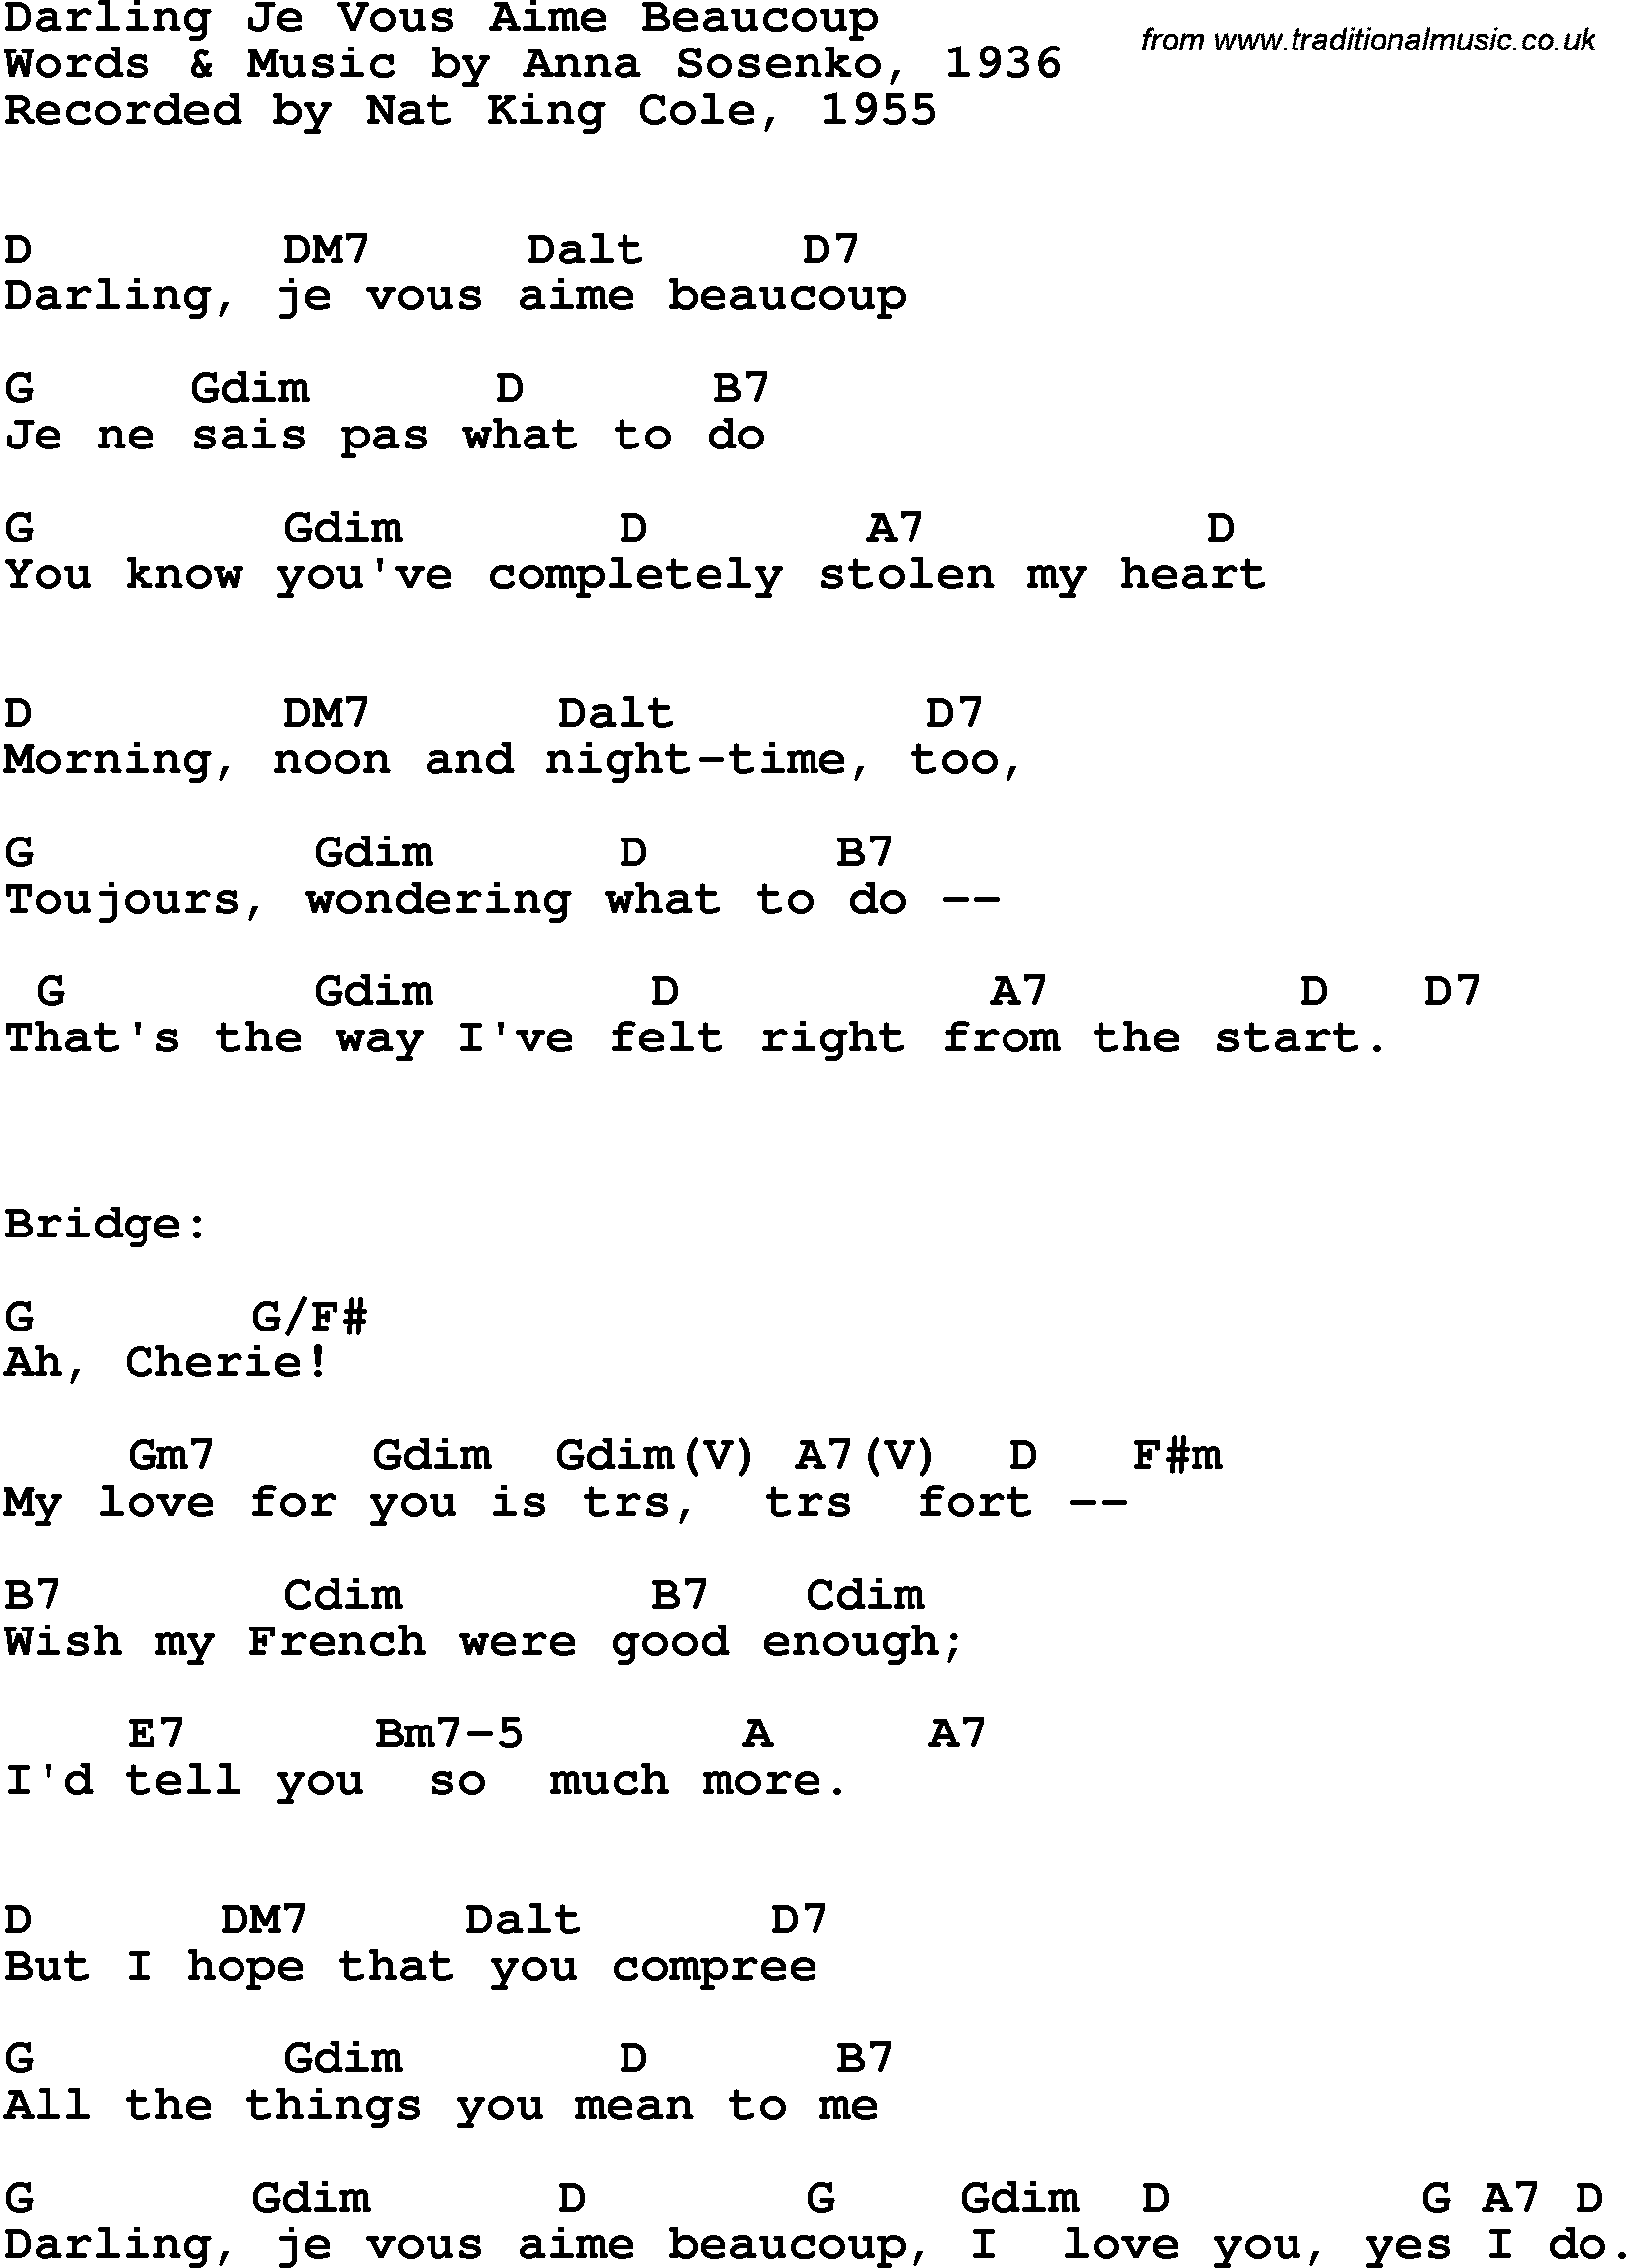 Song Lyrics with guitar chords for Darling Je Vous Aime Beaucoup - Nat King Cole, 1955